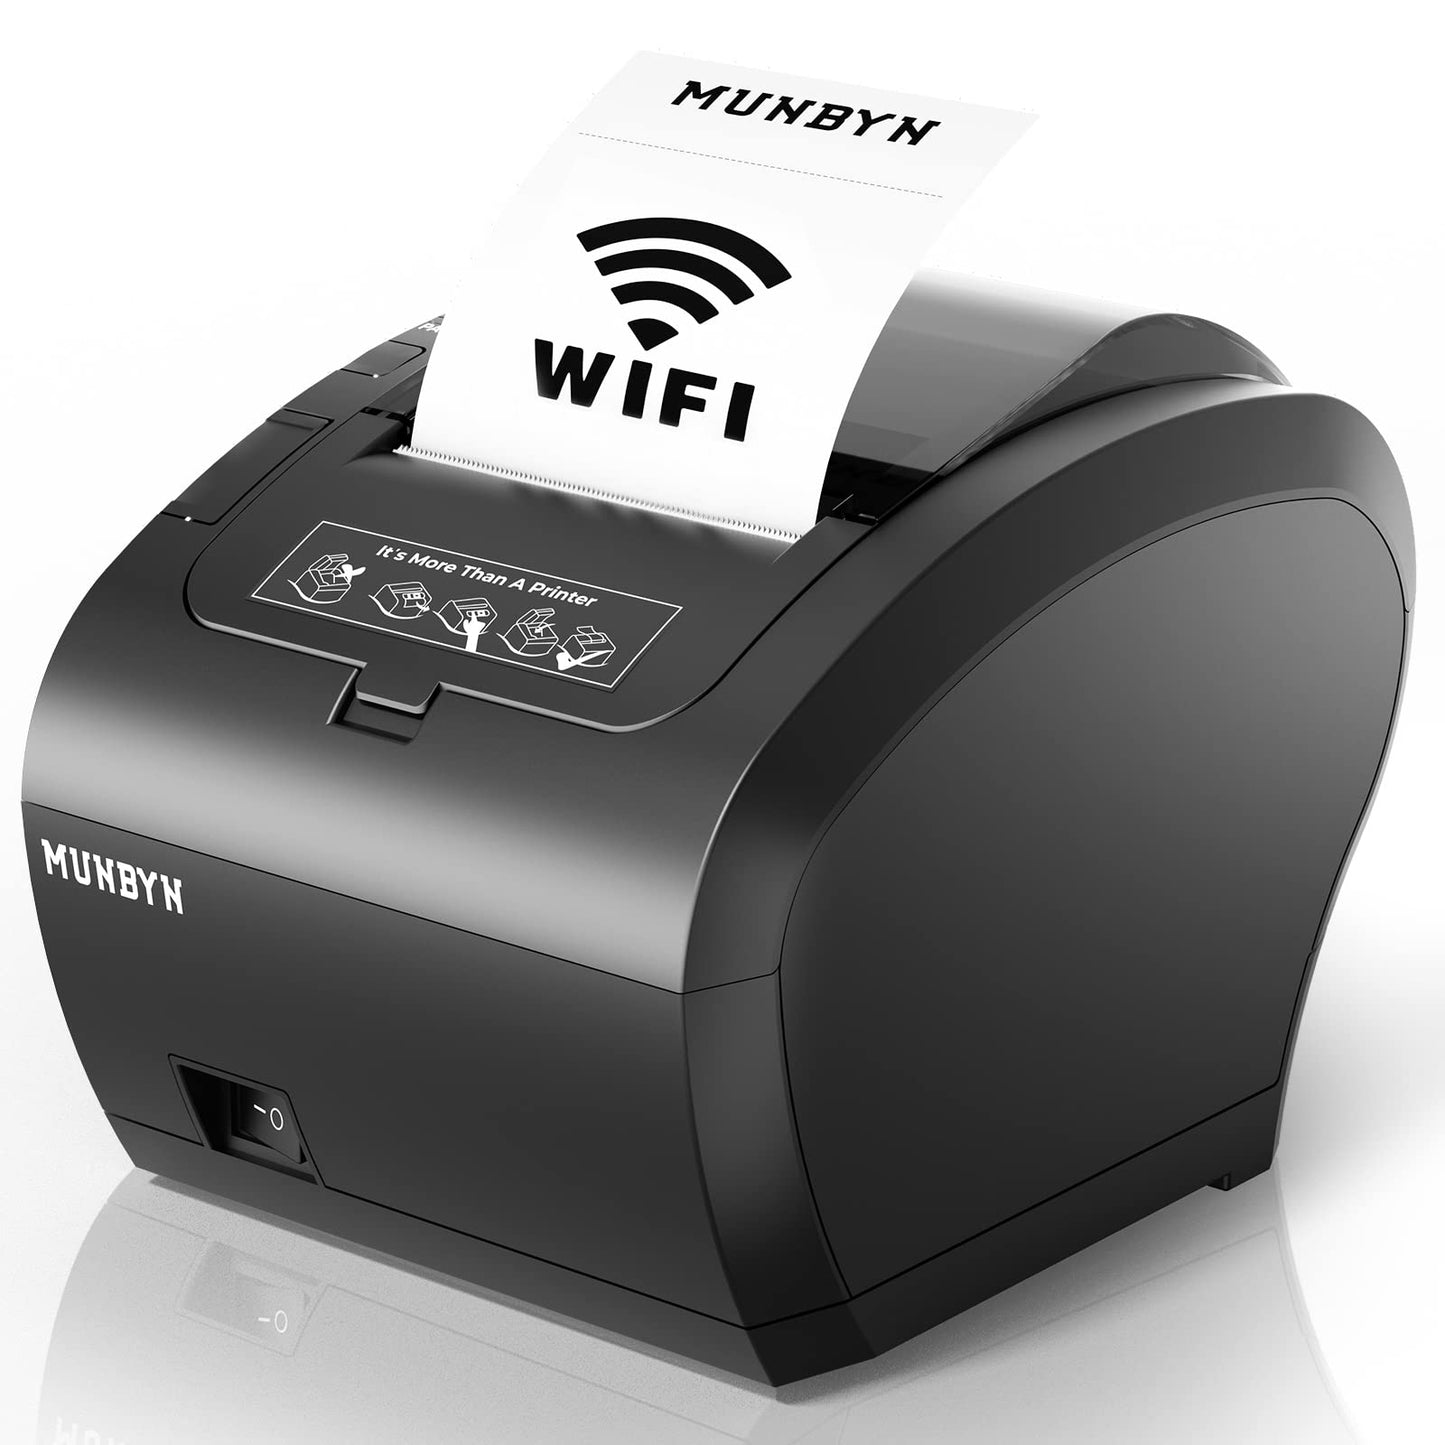 MUNBYN WiFi Receipt Printer with USB Port, 80mm POS Printer Works with Square Mac Windows Chromebook Linux Cash Drawer, ESC/POS (P047-WiFi), High-Speed Auto-Cutter Wall Mount